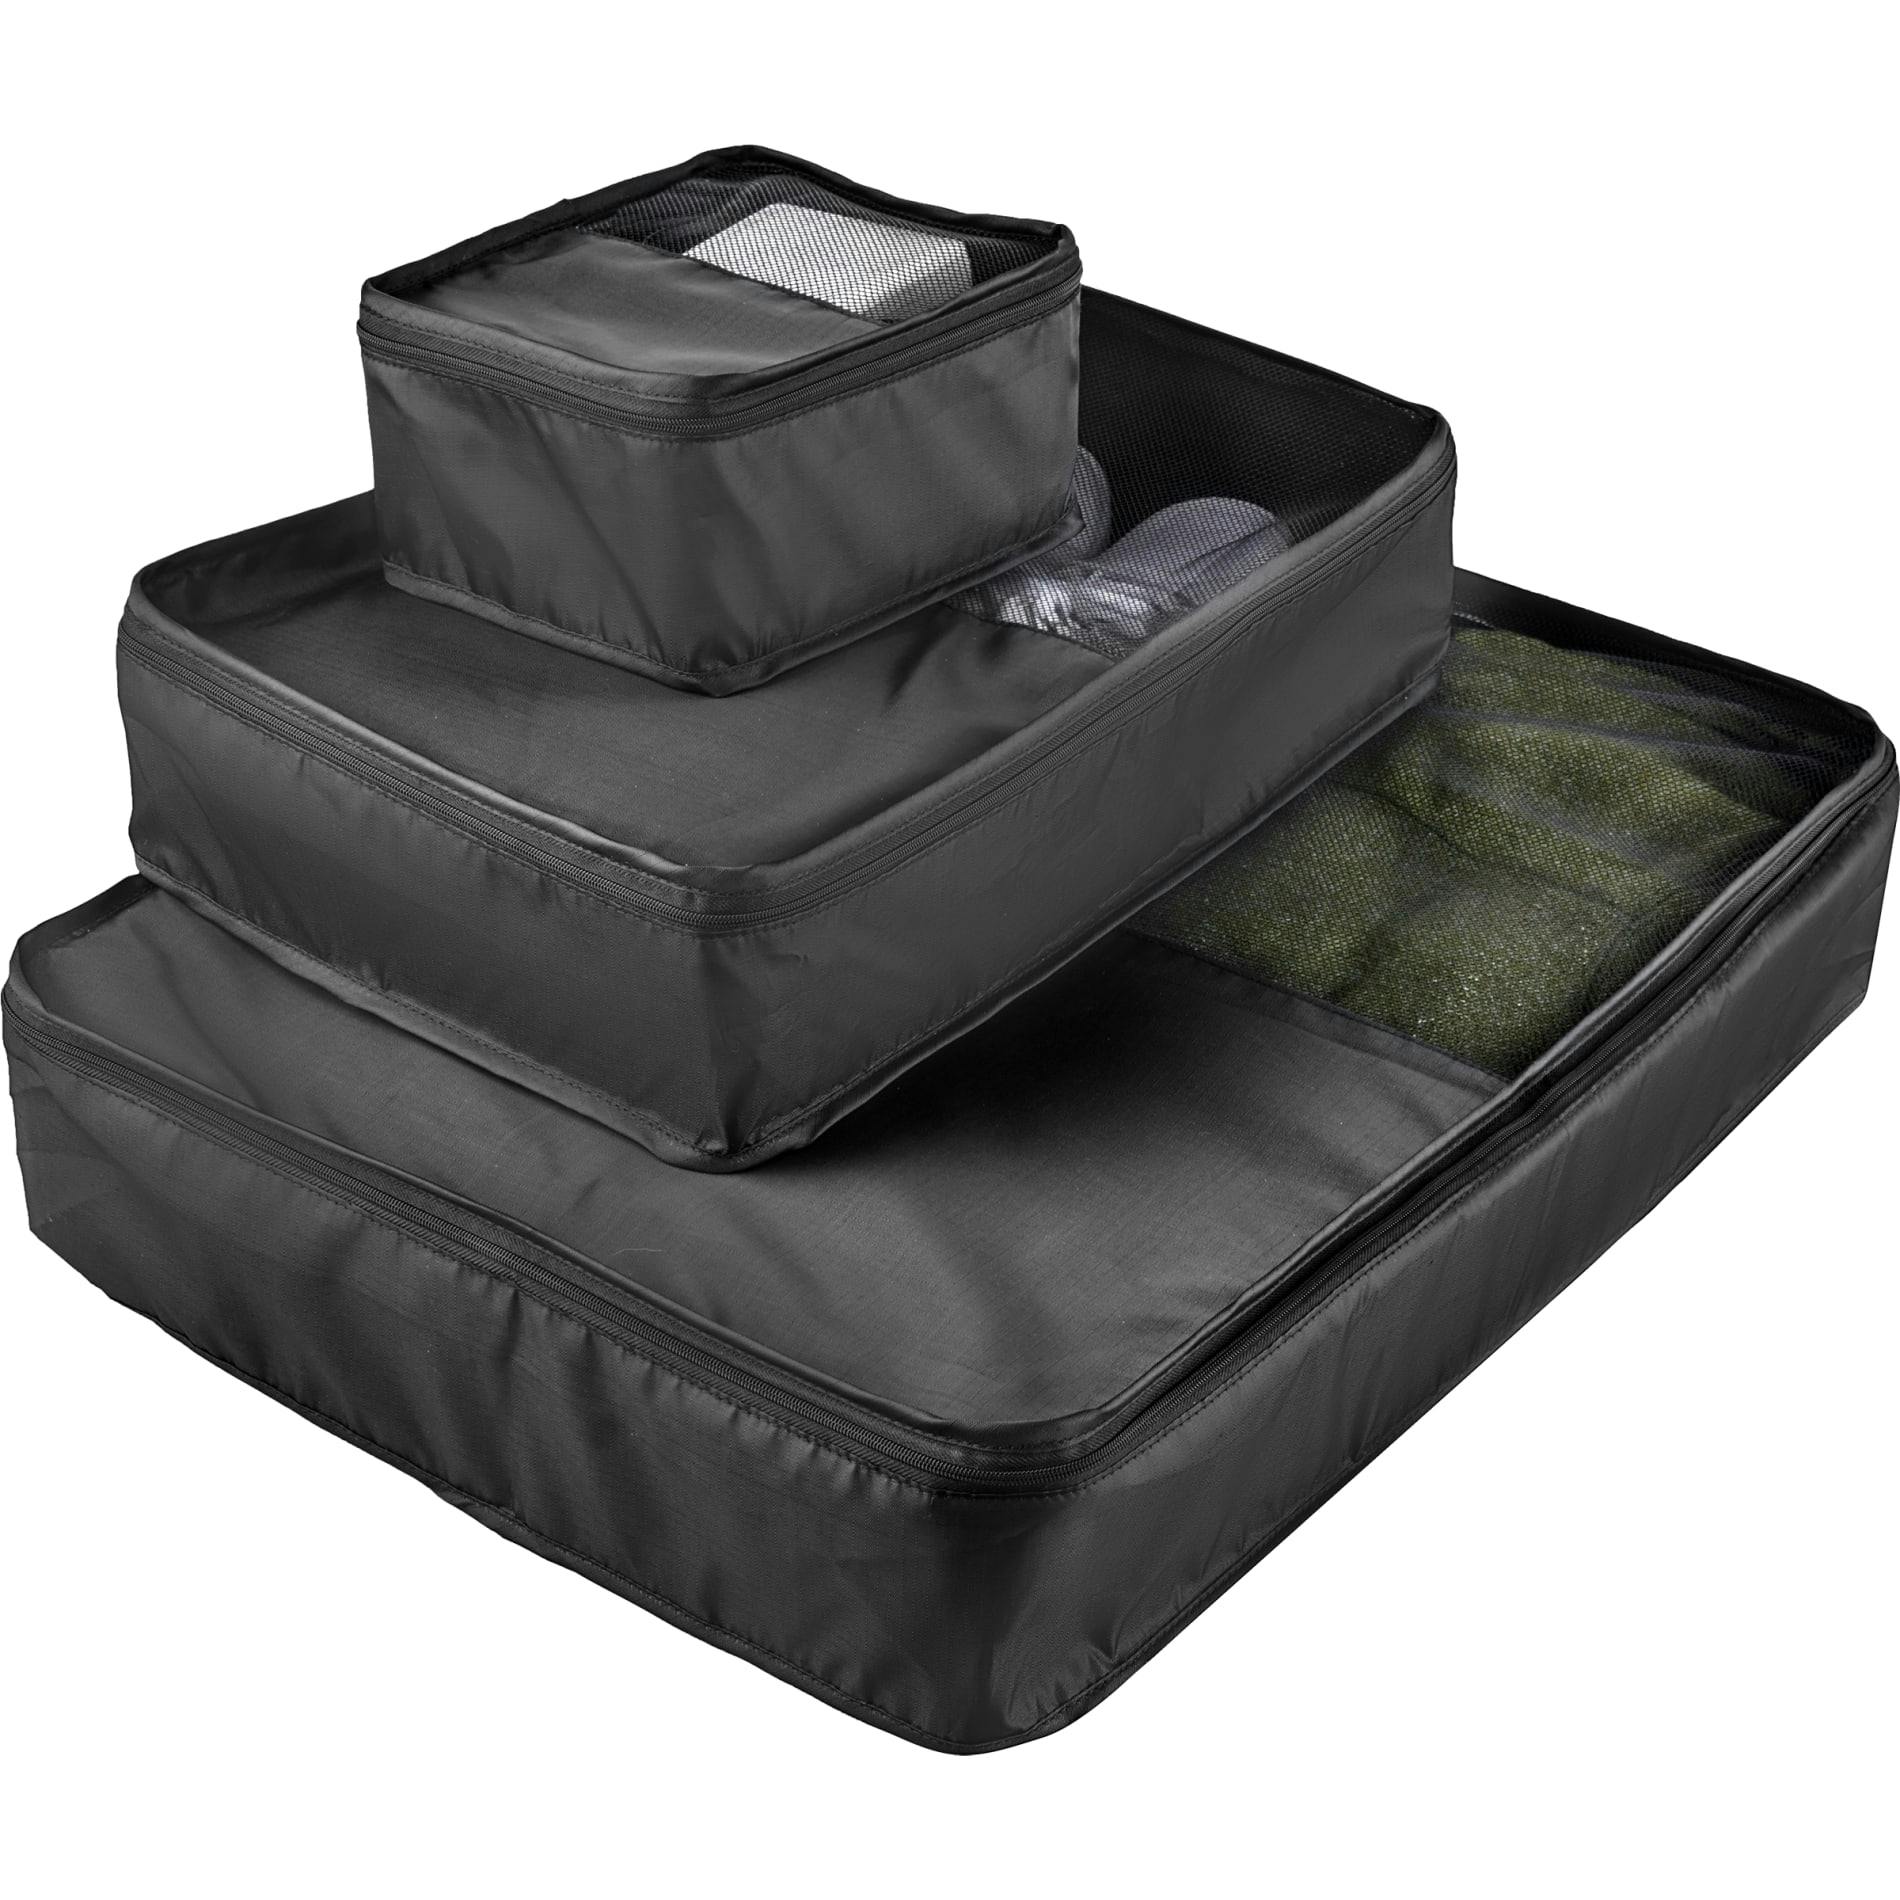 Packing Cubes 3pc Set - additional Image 2